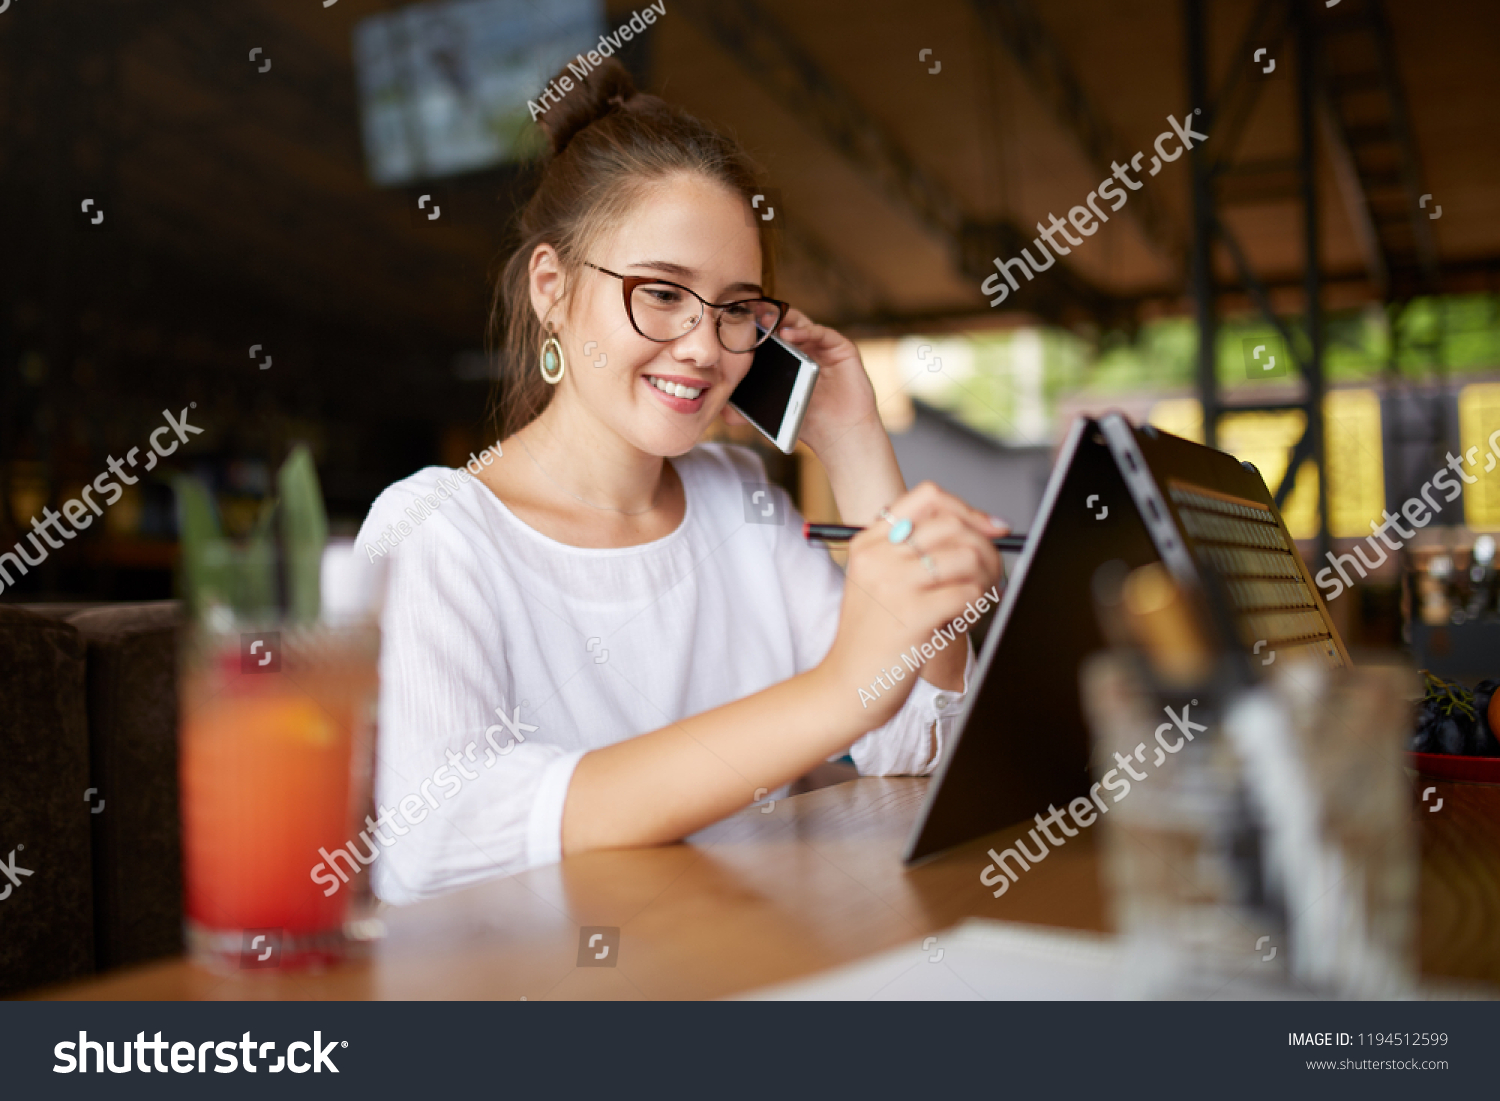 Mixed race freelancer working with convertible laptop and talking on cellphone with client in cafe. Asian caucasian businesswoman conducts negotiations via phone call. Multitasking business concept. #1194512599